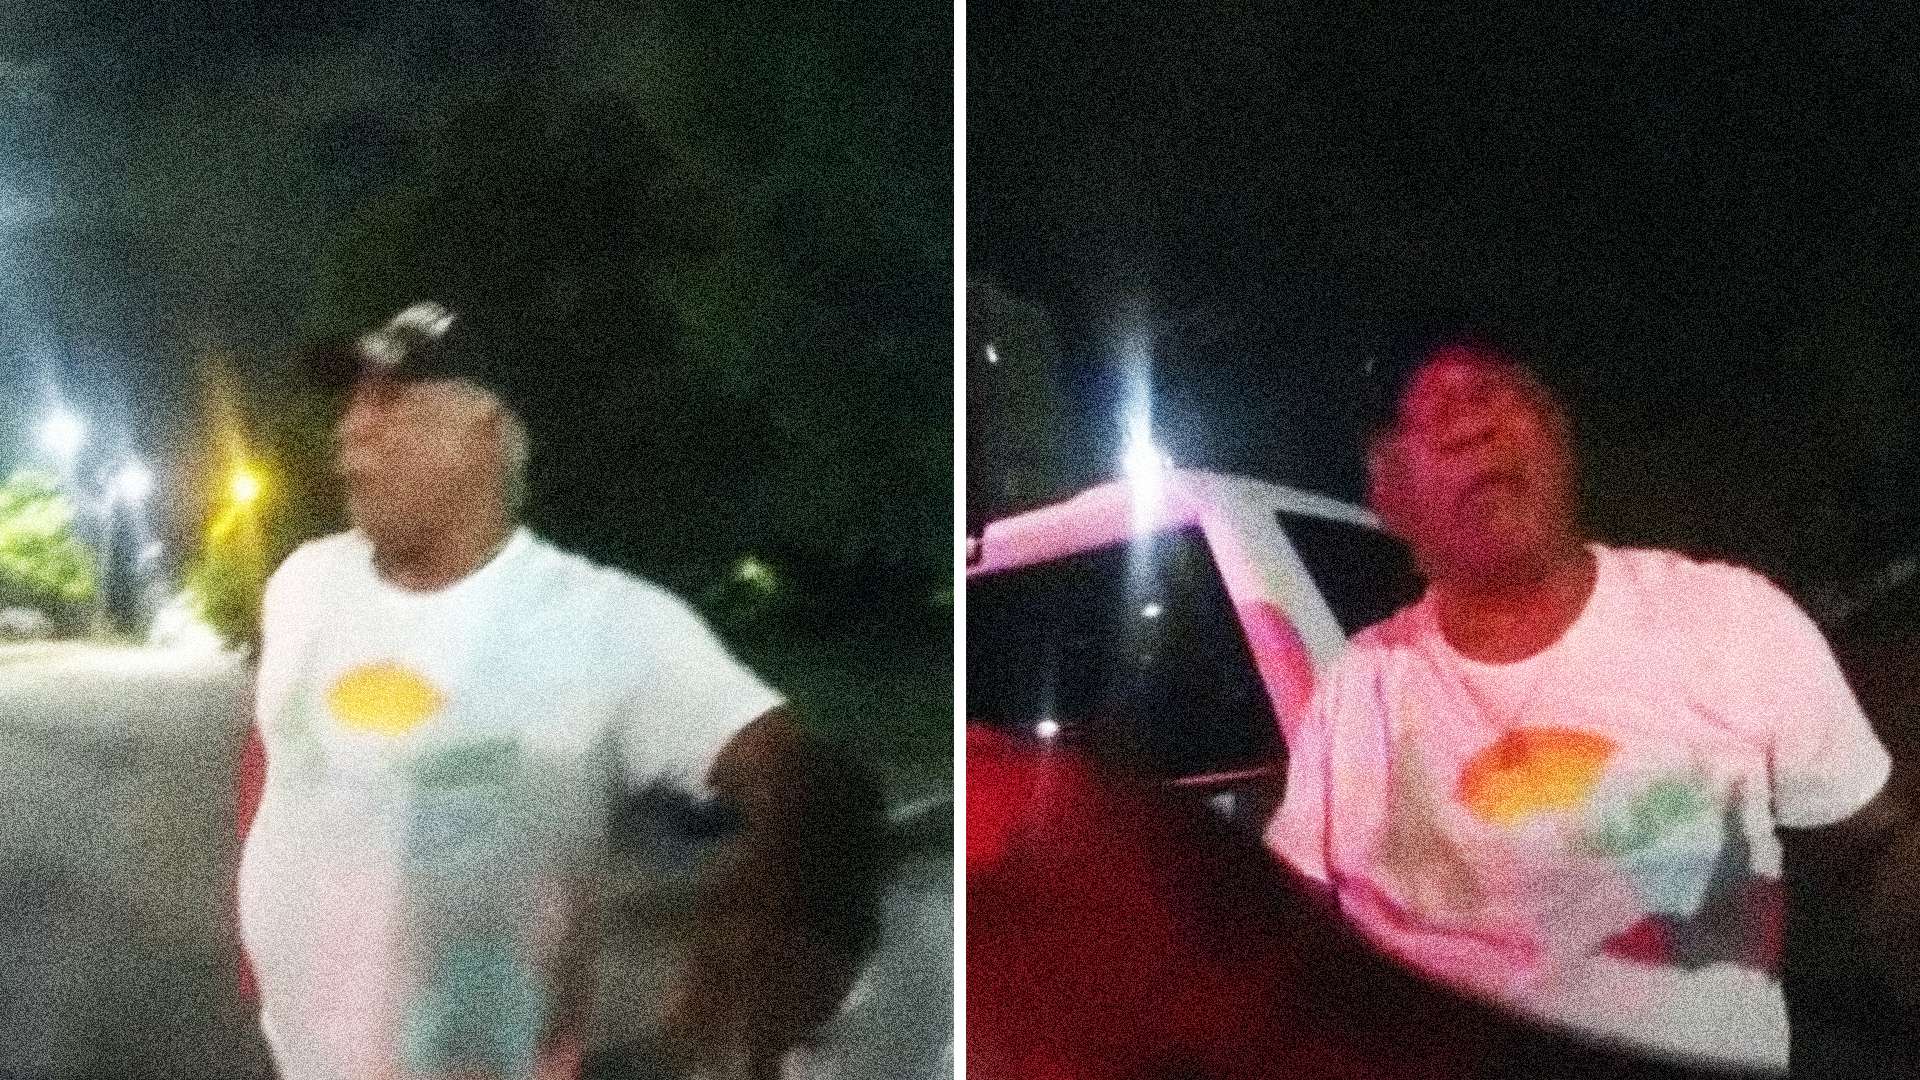 An Atlanta Cop Killed This Man For Refusing To Sign a Ticket